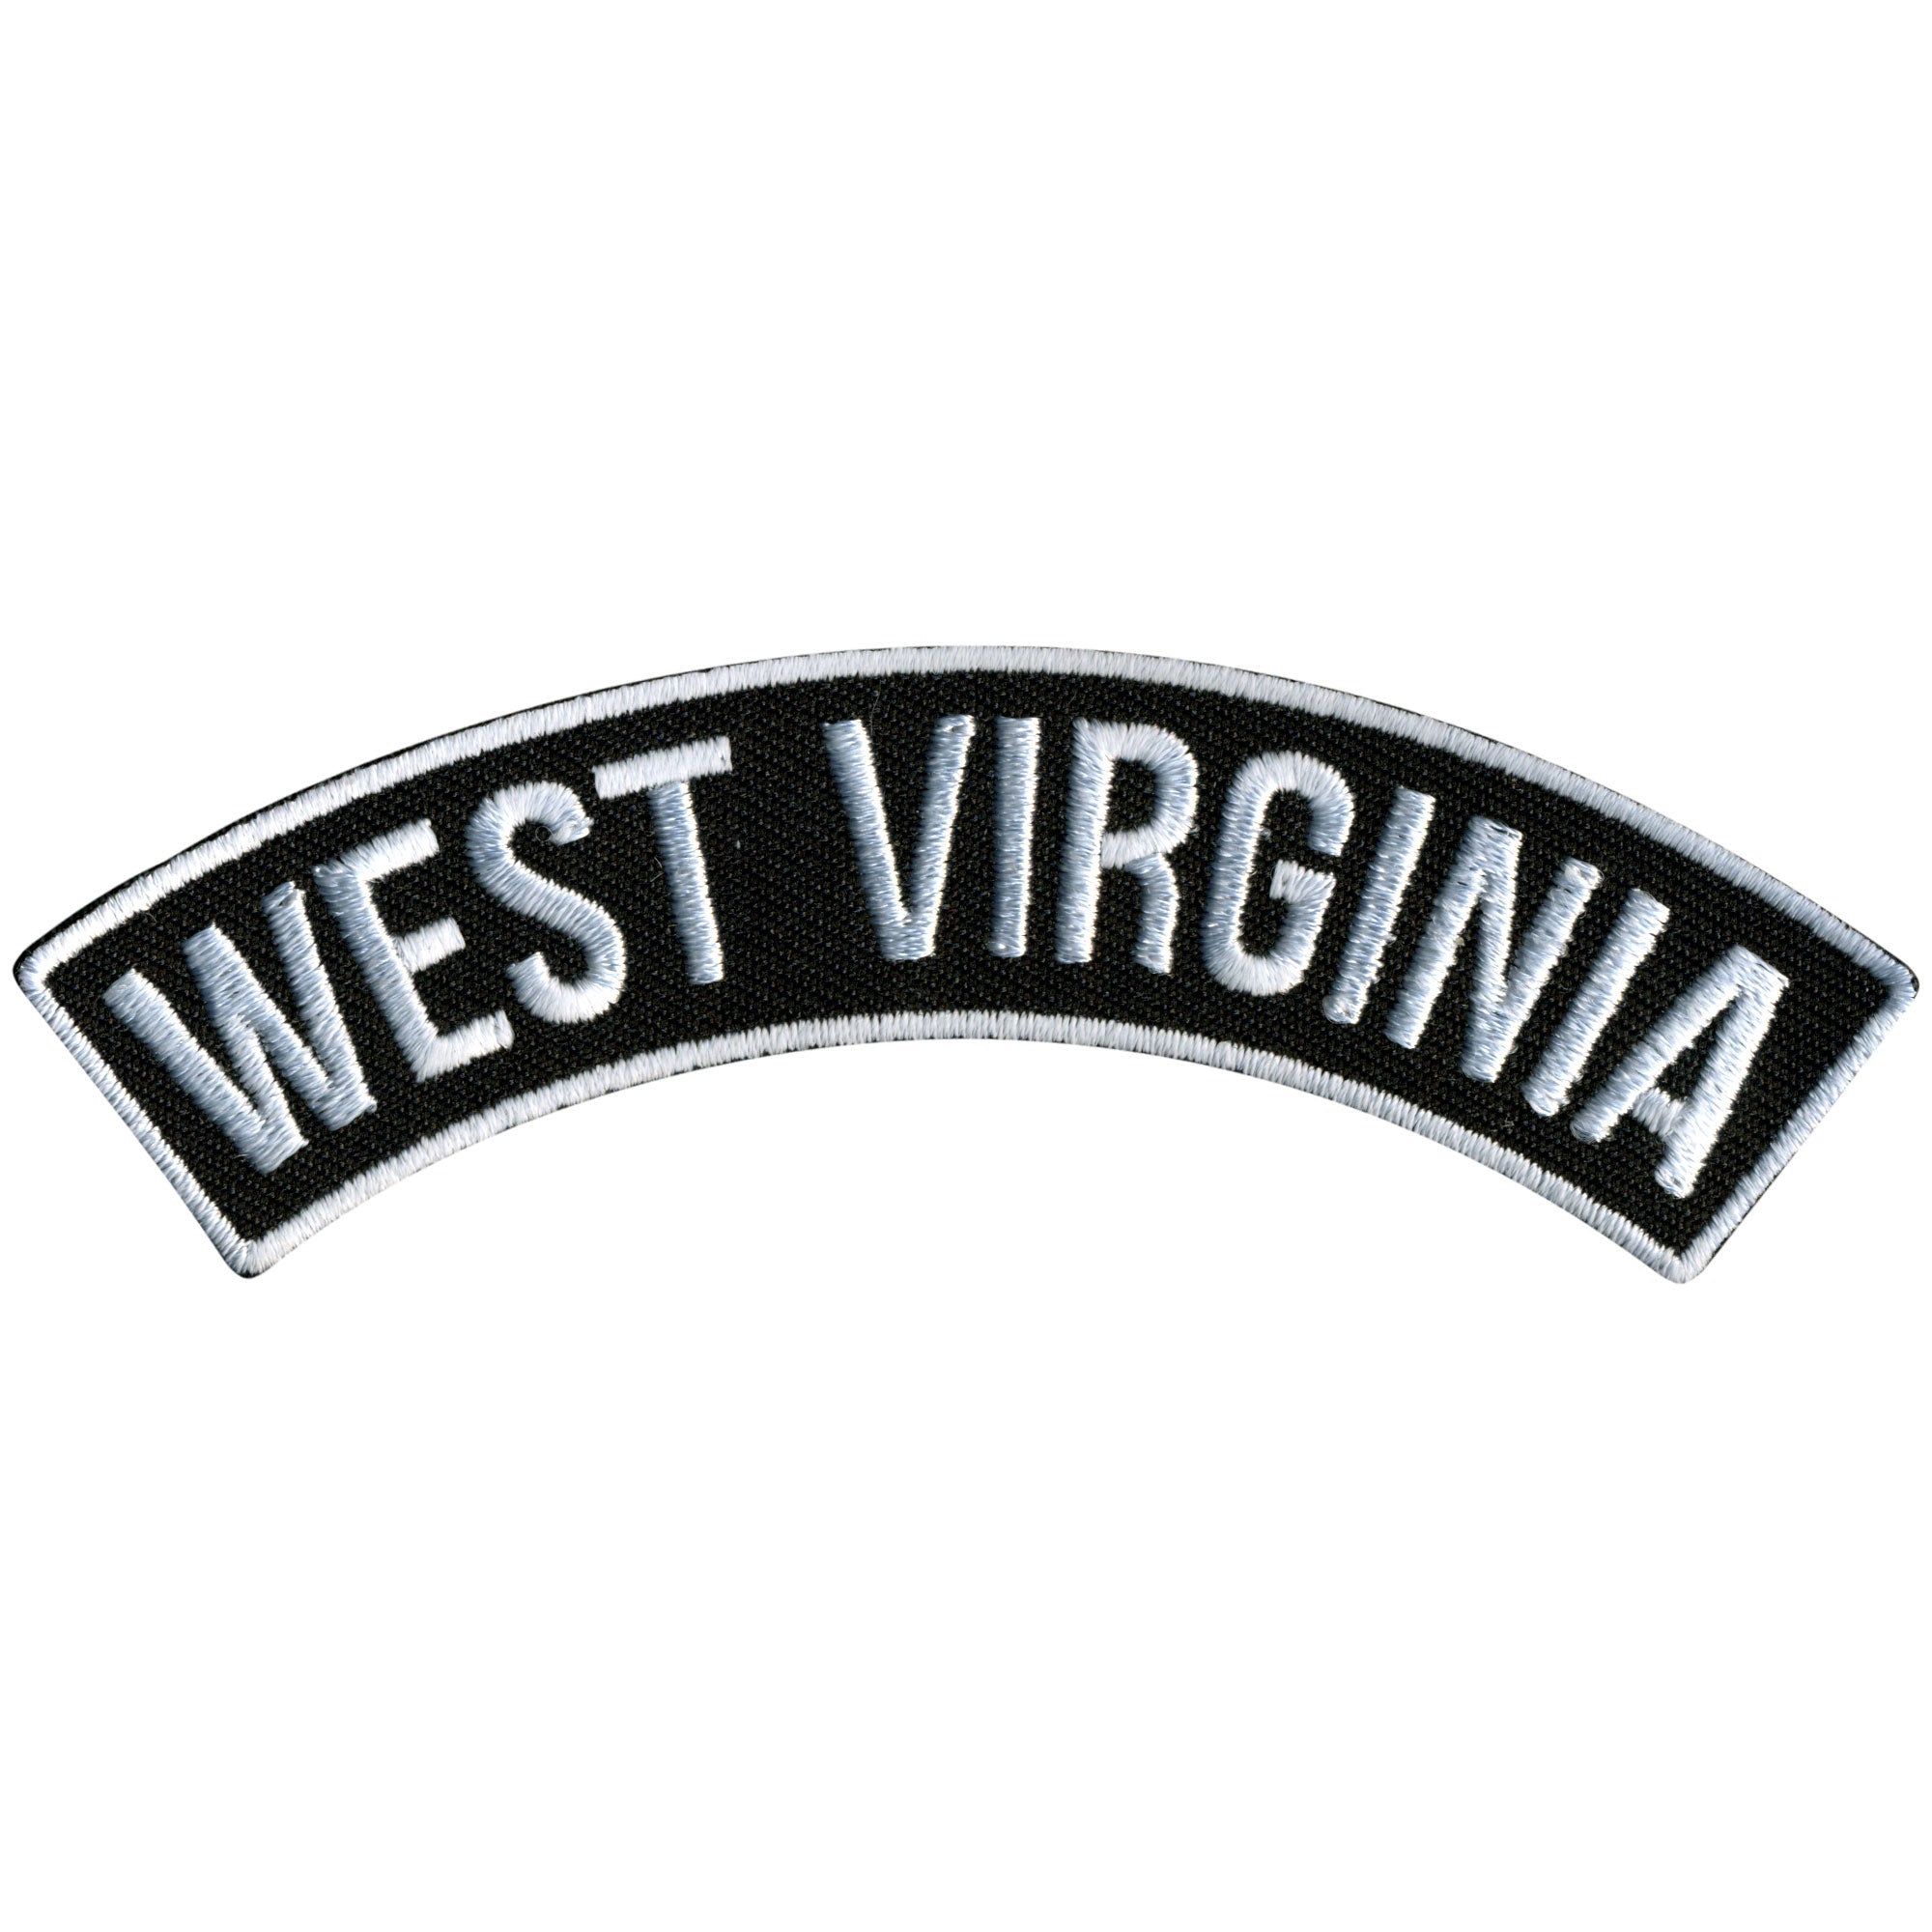 Hot Leathers West Virginia 4” X 1” Top Rocker Patch